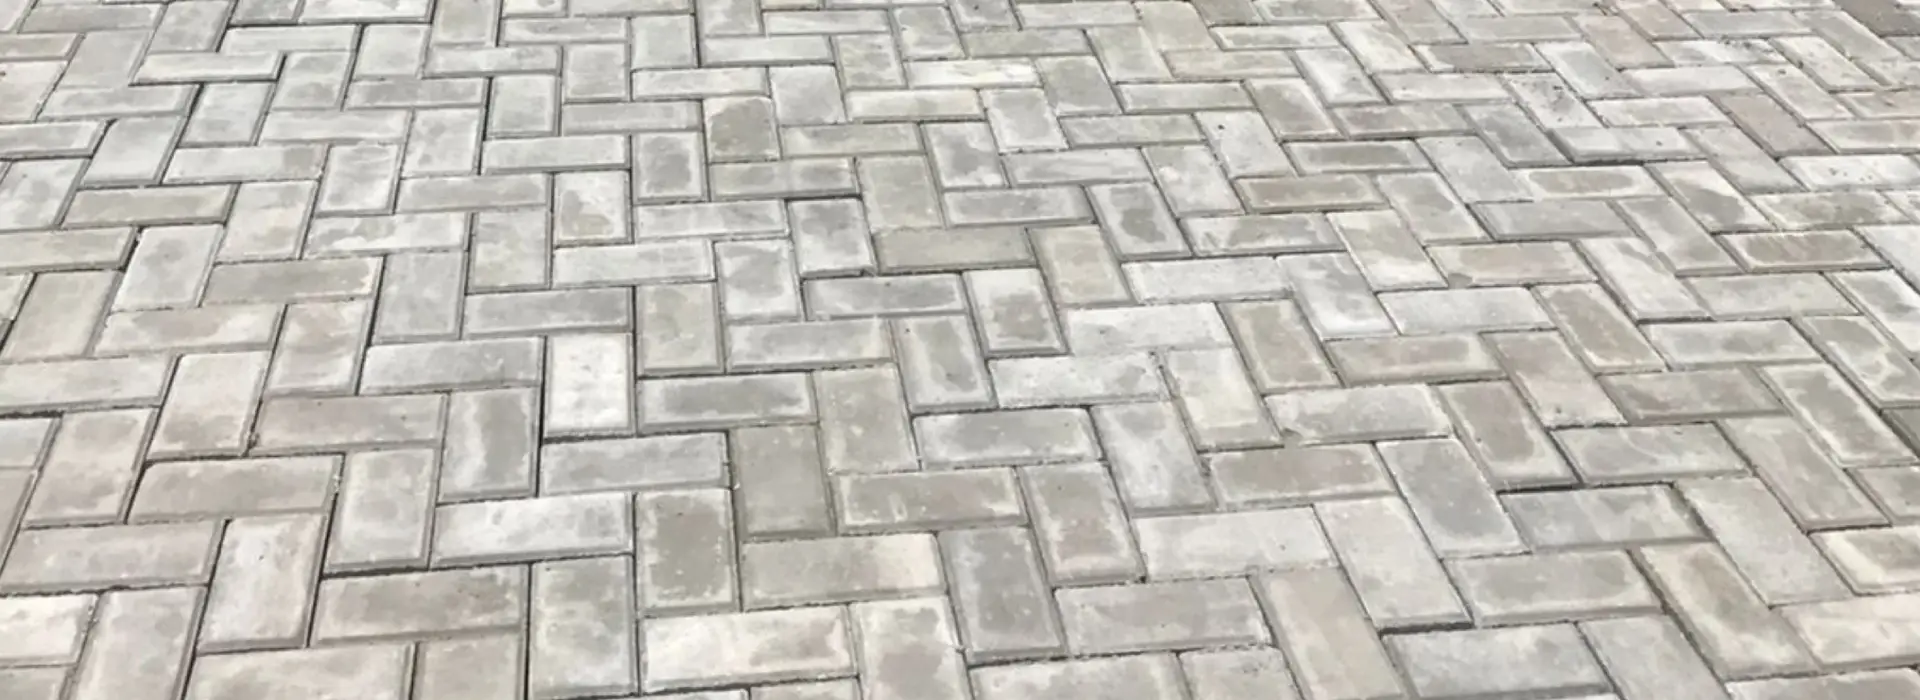 Industrial Paver Block Manufacturers in Chennai